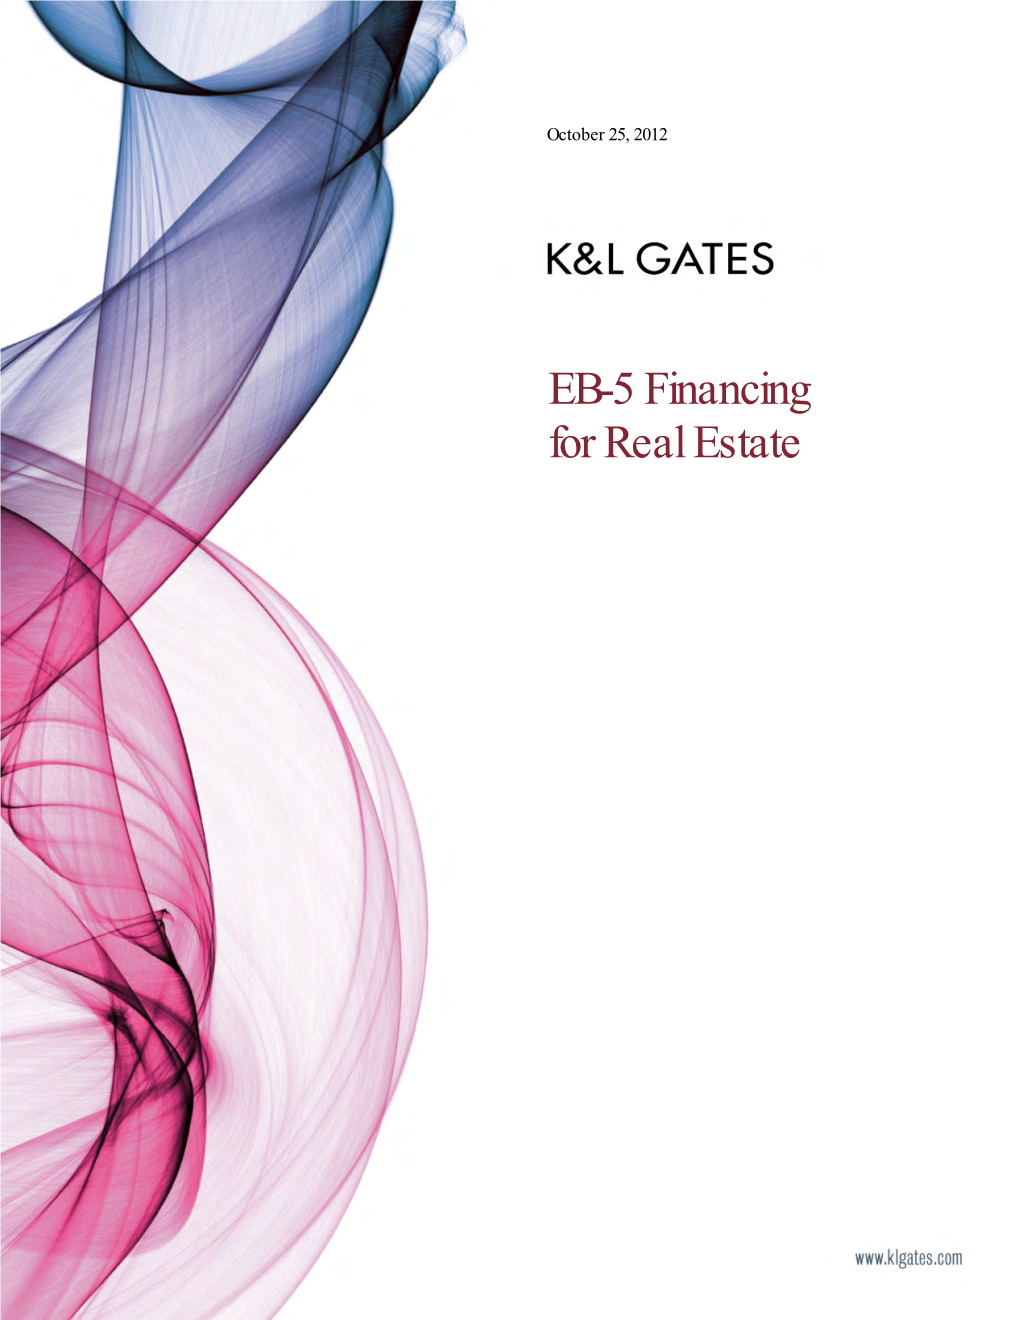 EB-5 Financing for Real Estate